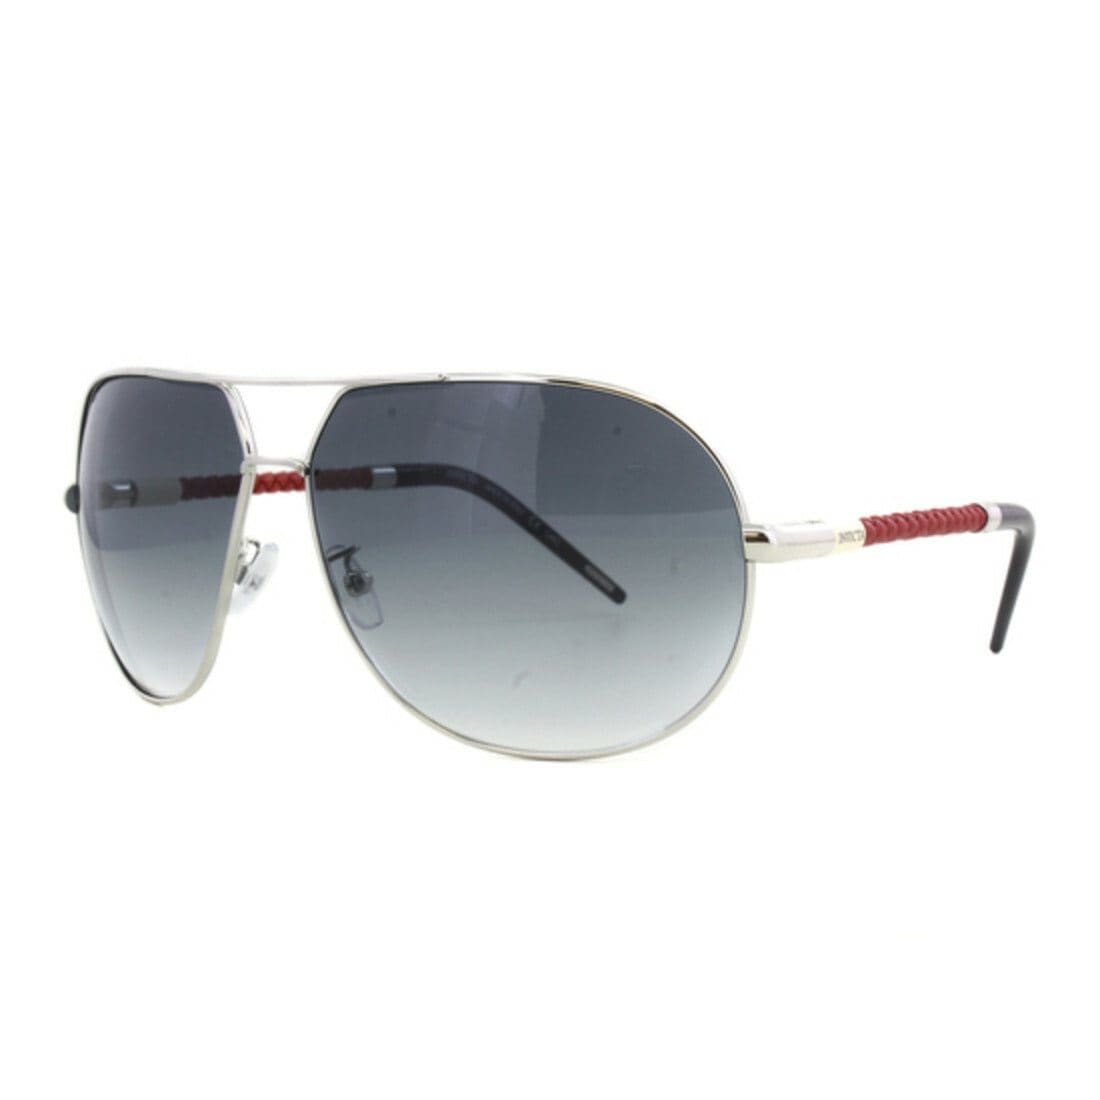 Invicta IEW004-04 Silver with Red Full Rim Gradient Grey Lenses Women's Sunglasses Frames 886678390151